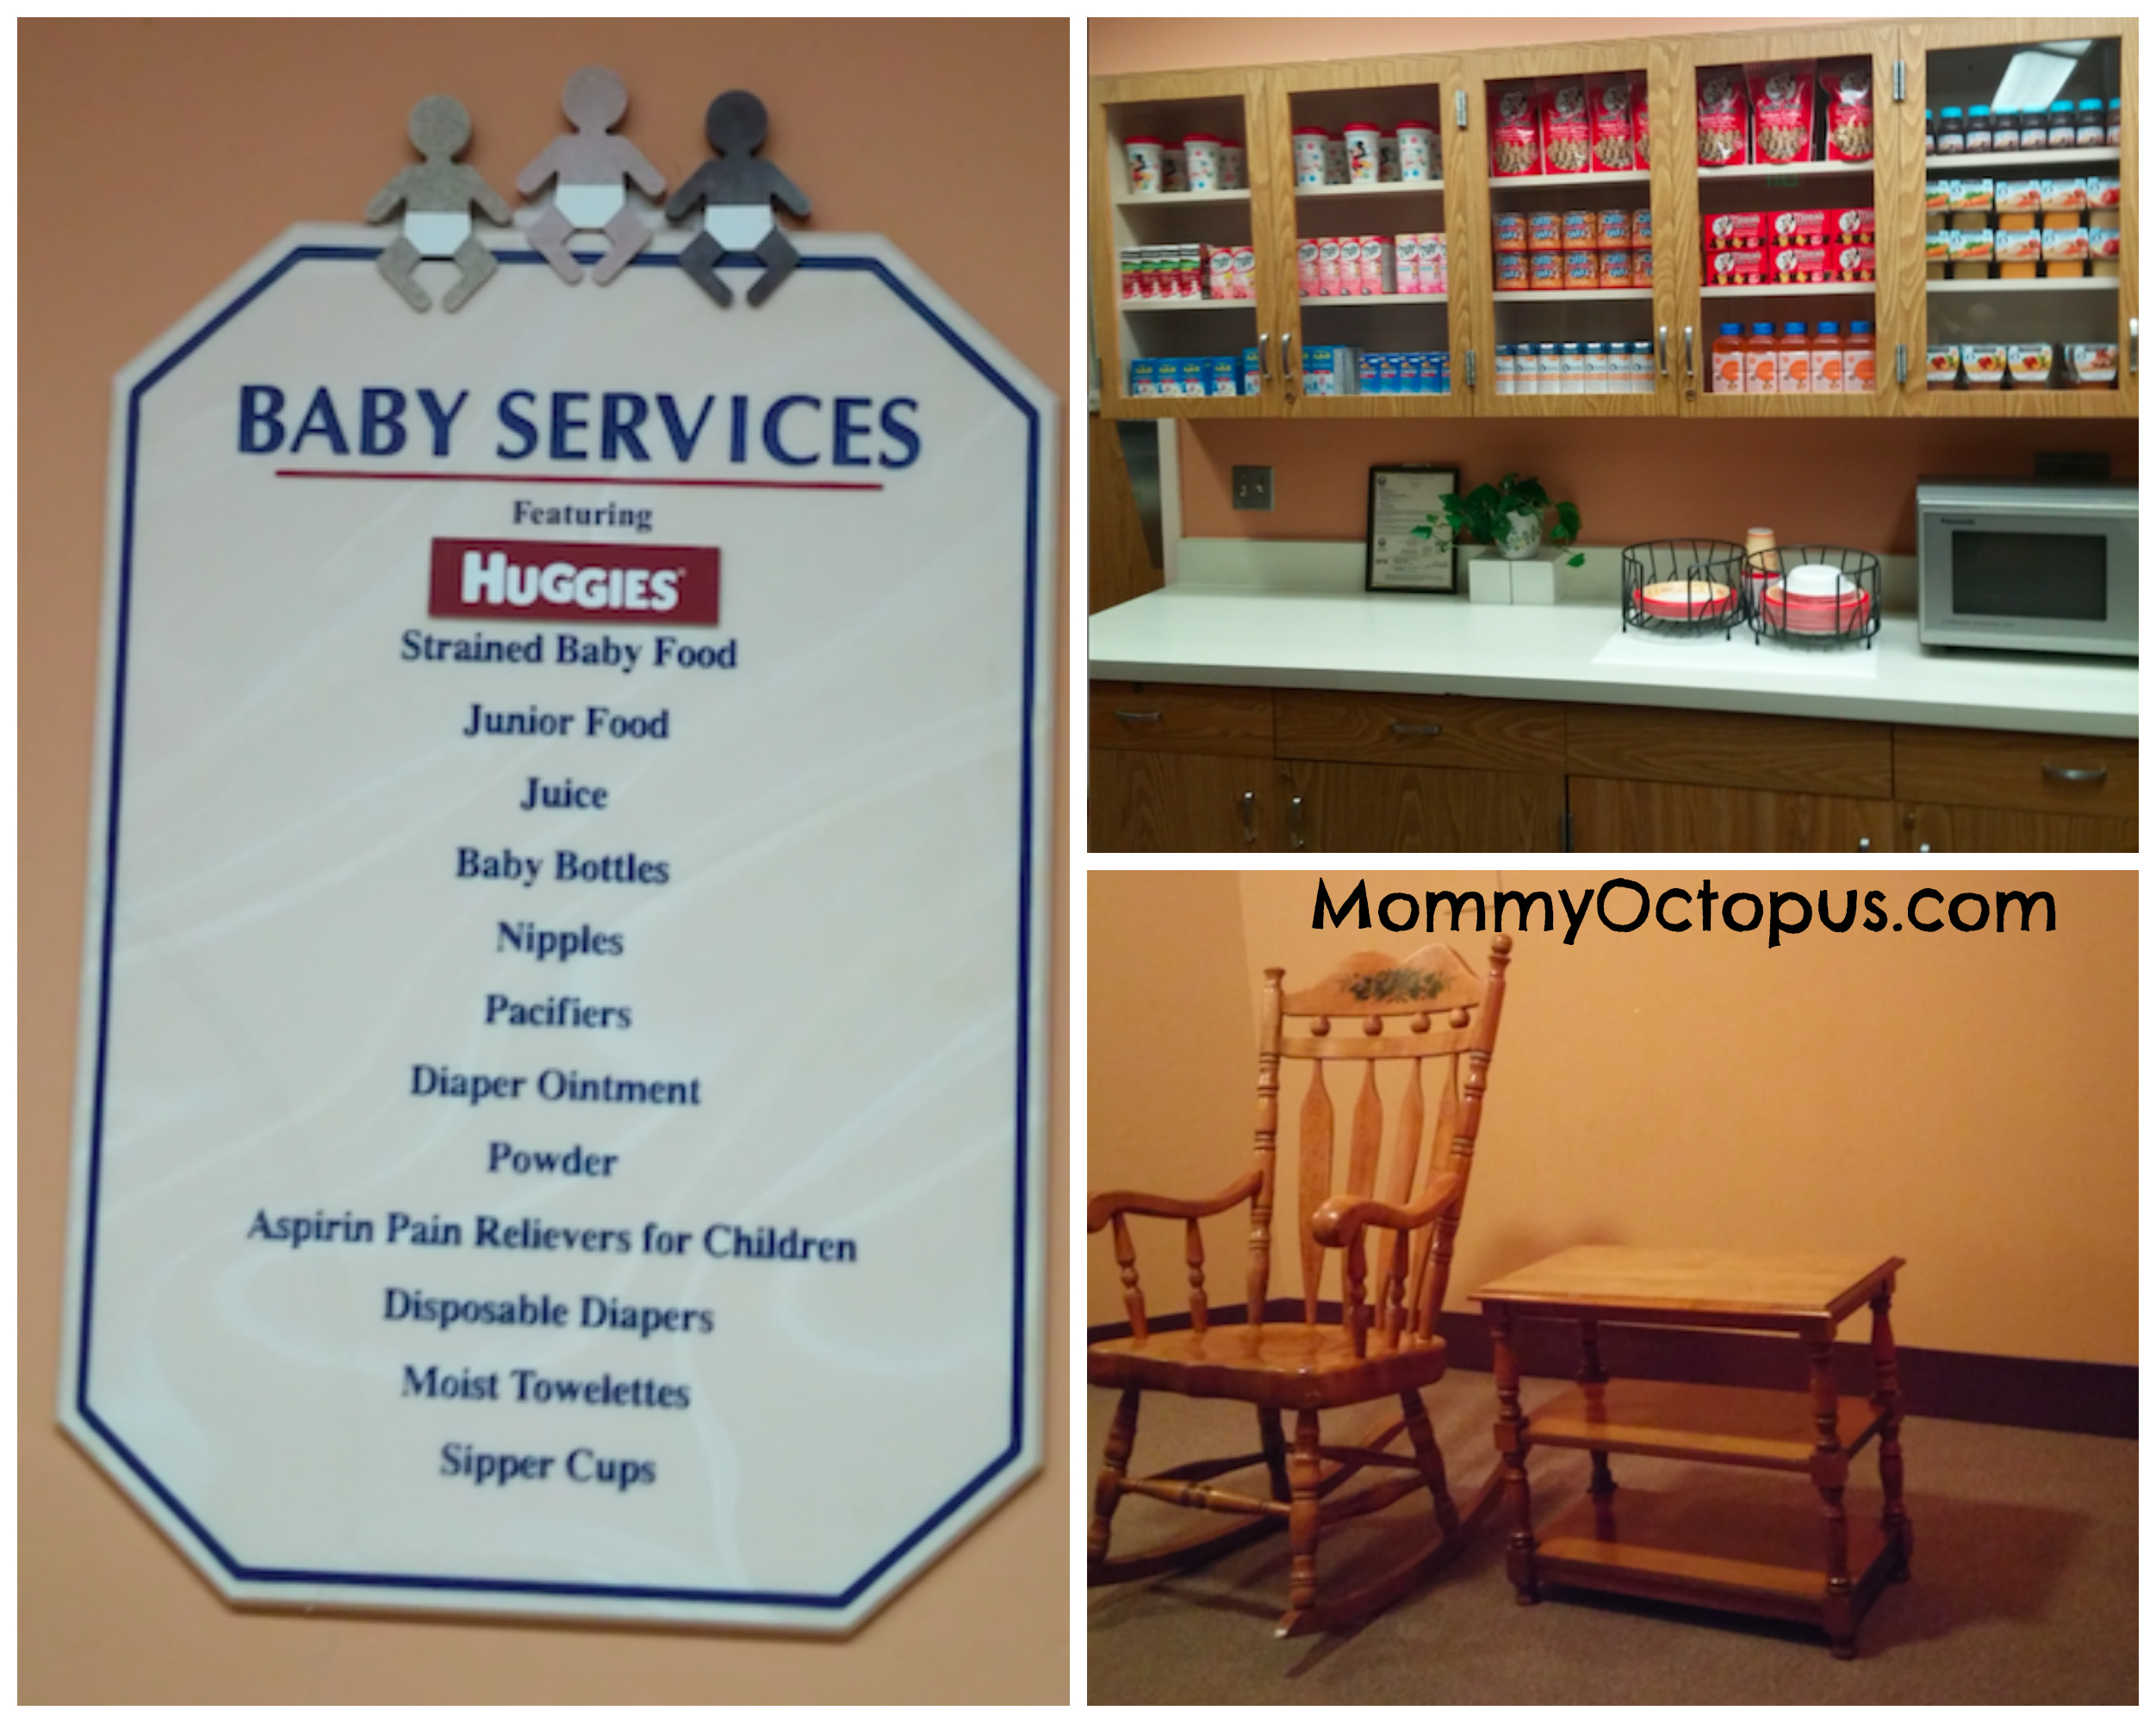 baby care center